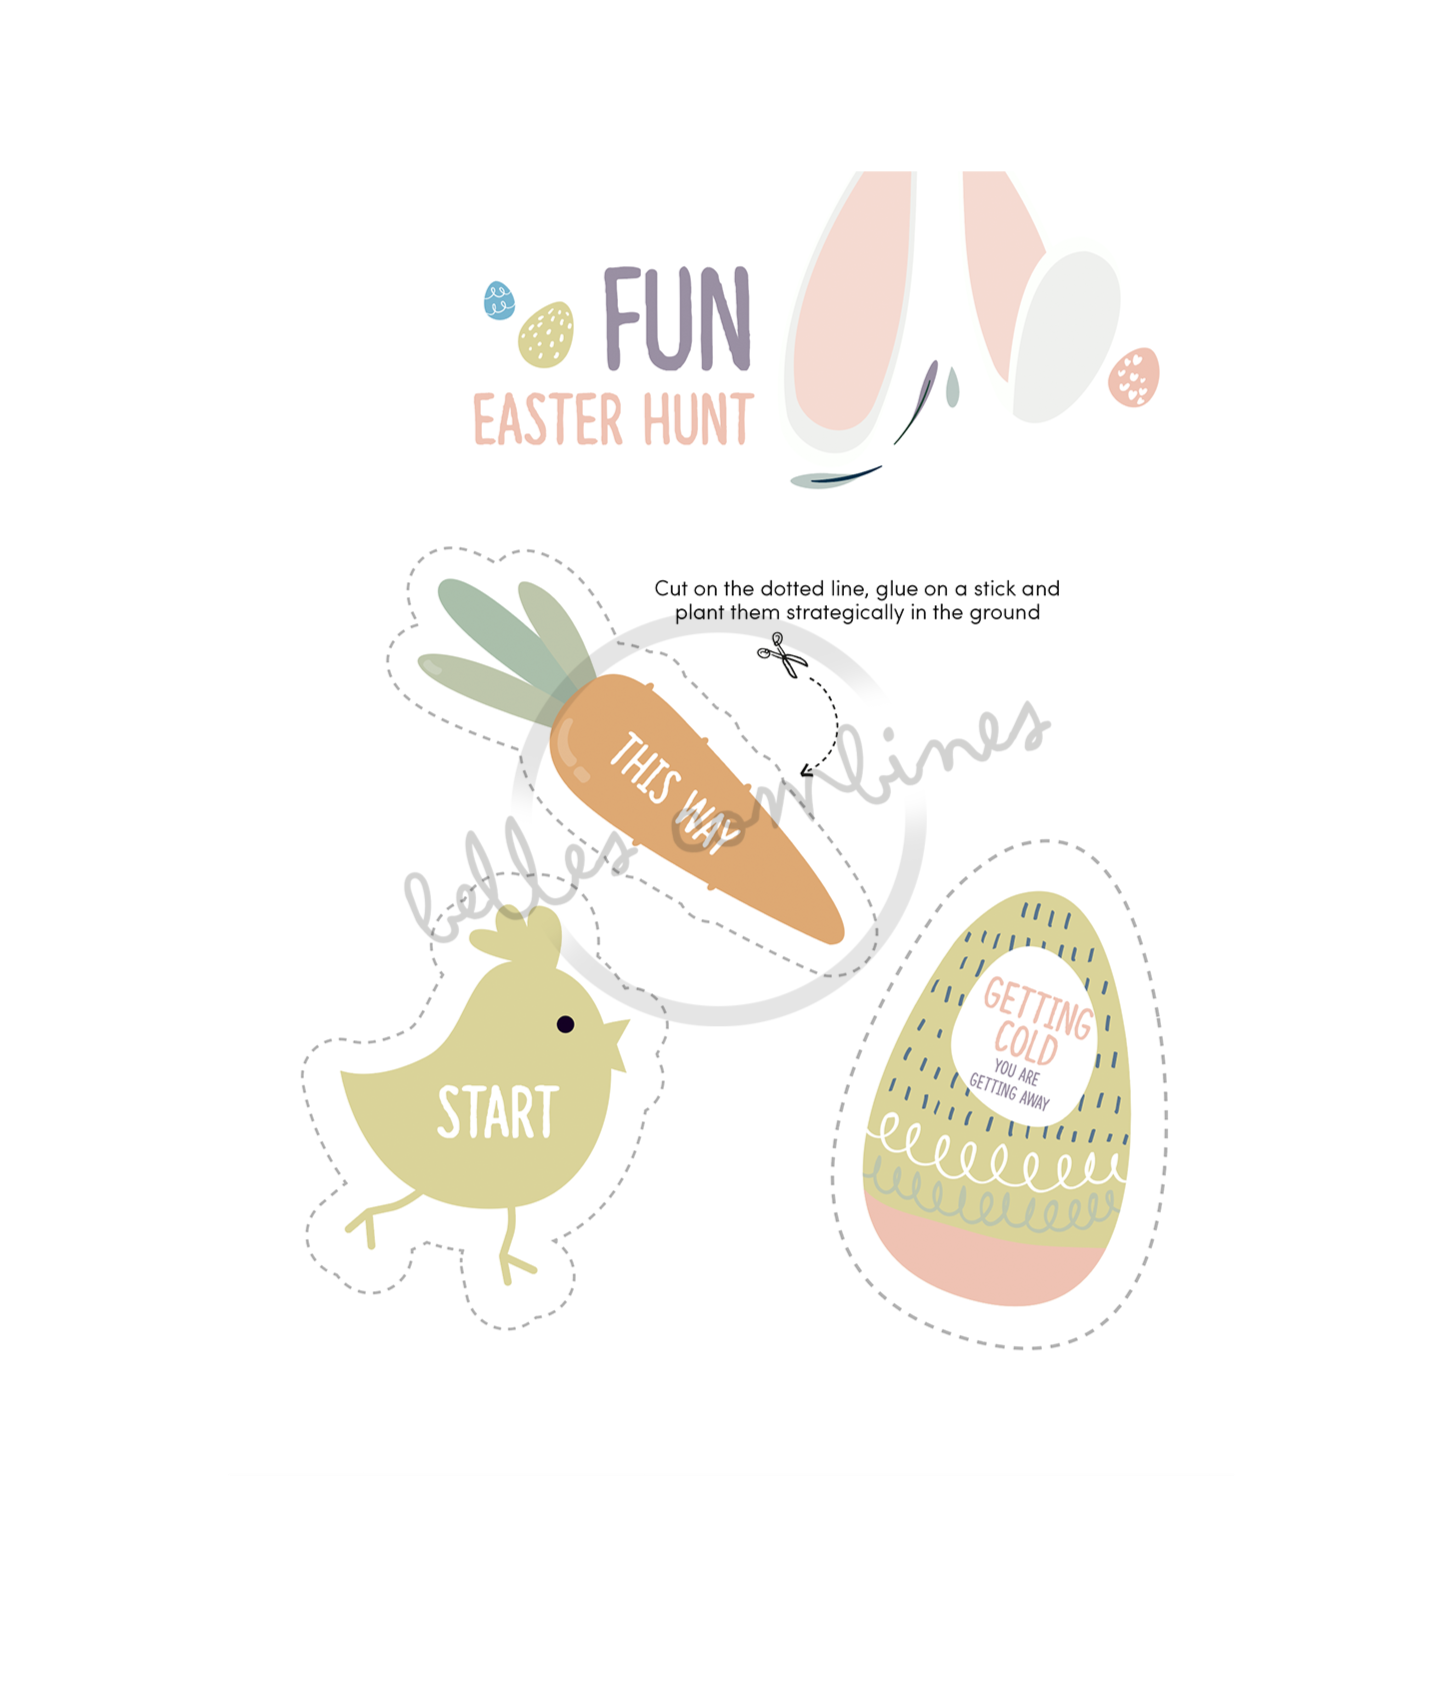 English version of the fun easter hunt document made by Les Belles Combines